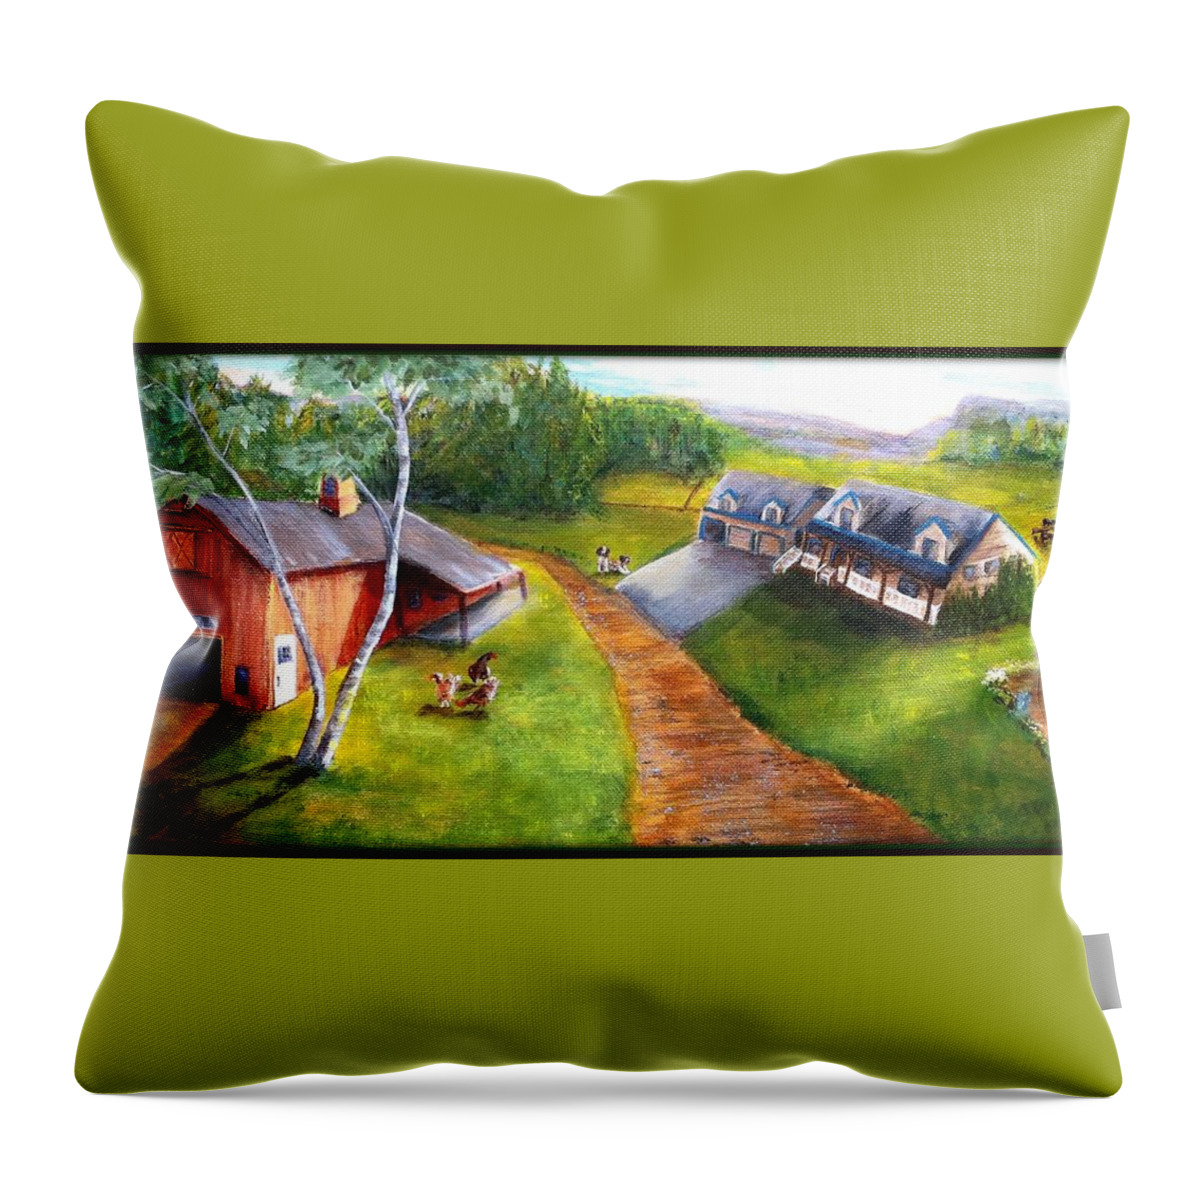 Farm Throw Pillow featuring the painting Modern New Hampshire Farm by Deborah Naves